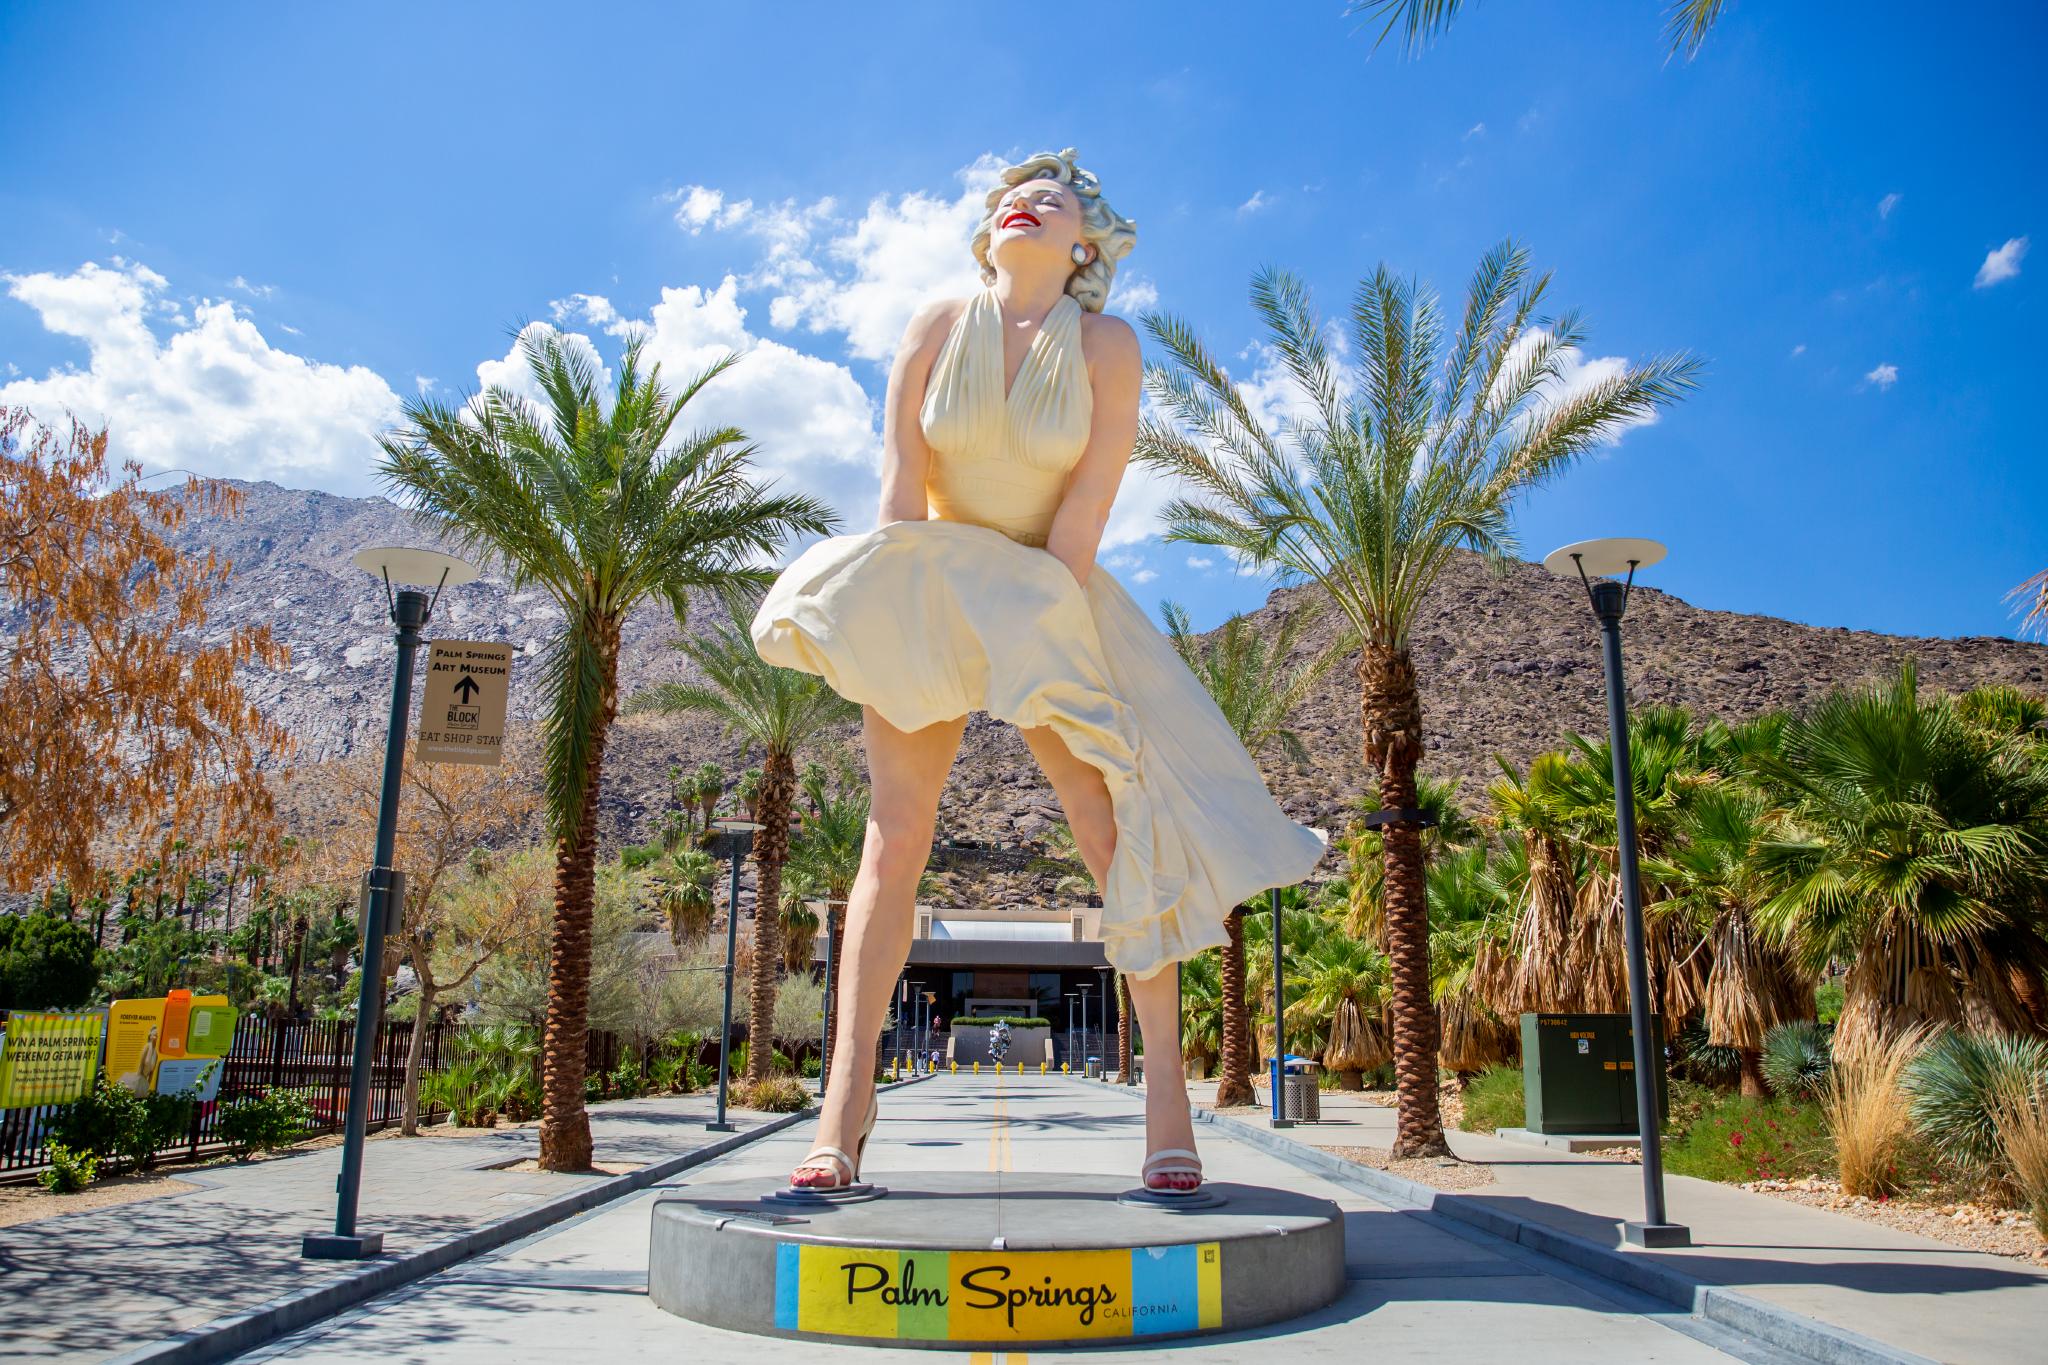 What's Your Palm Springs Personality?